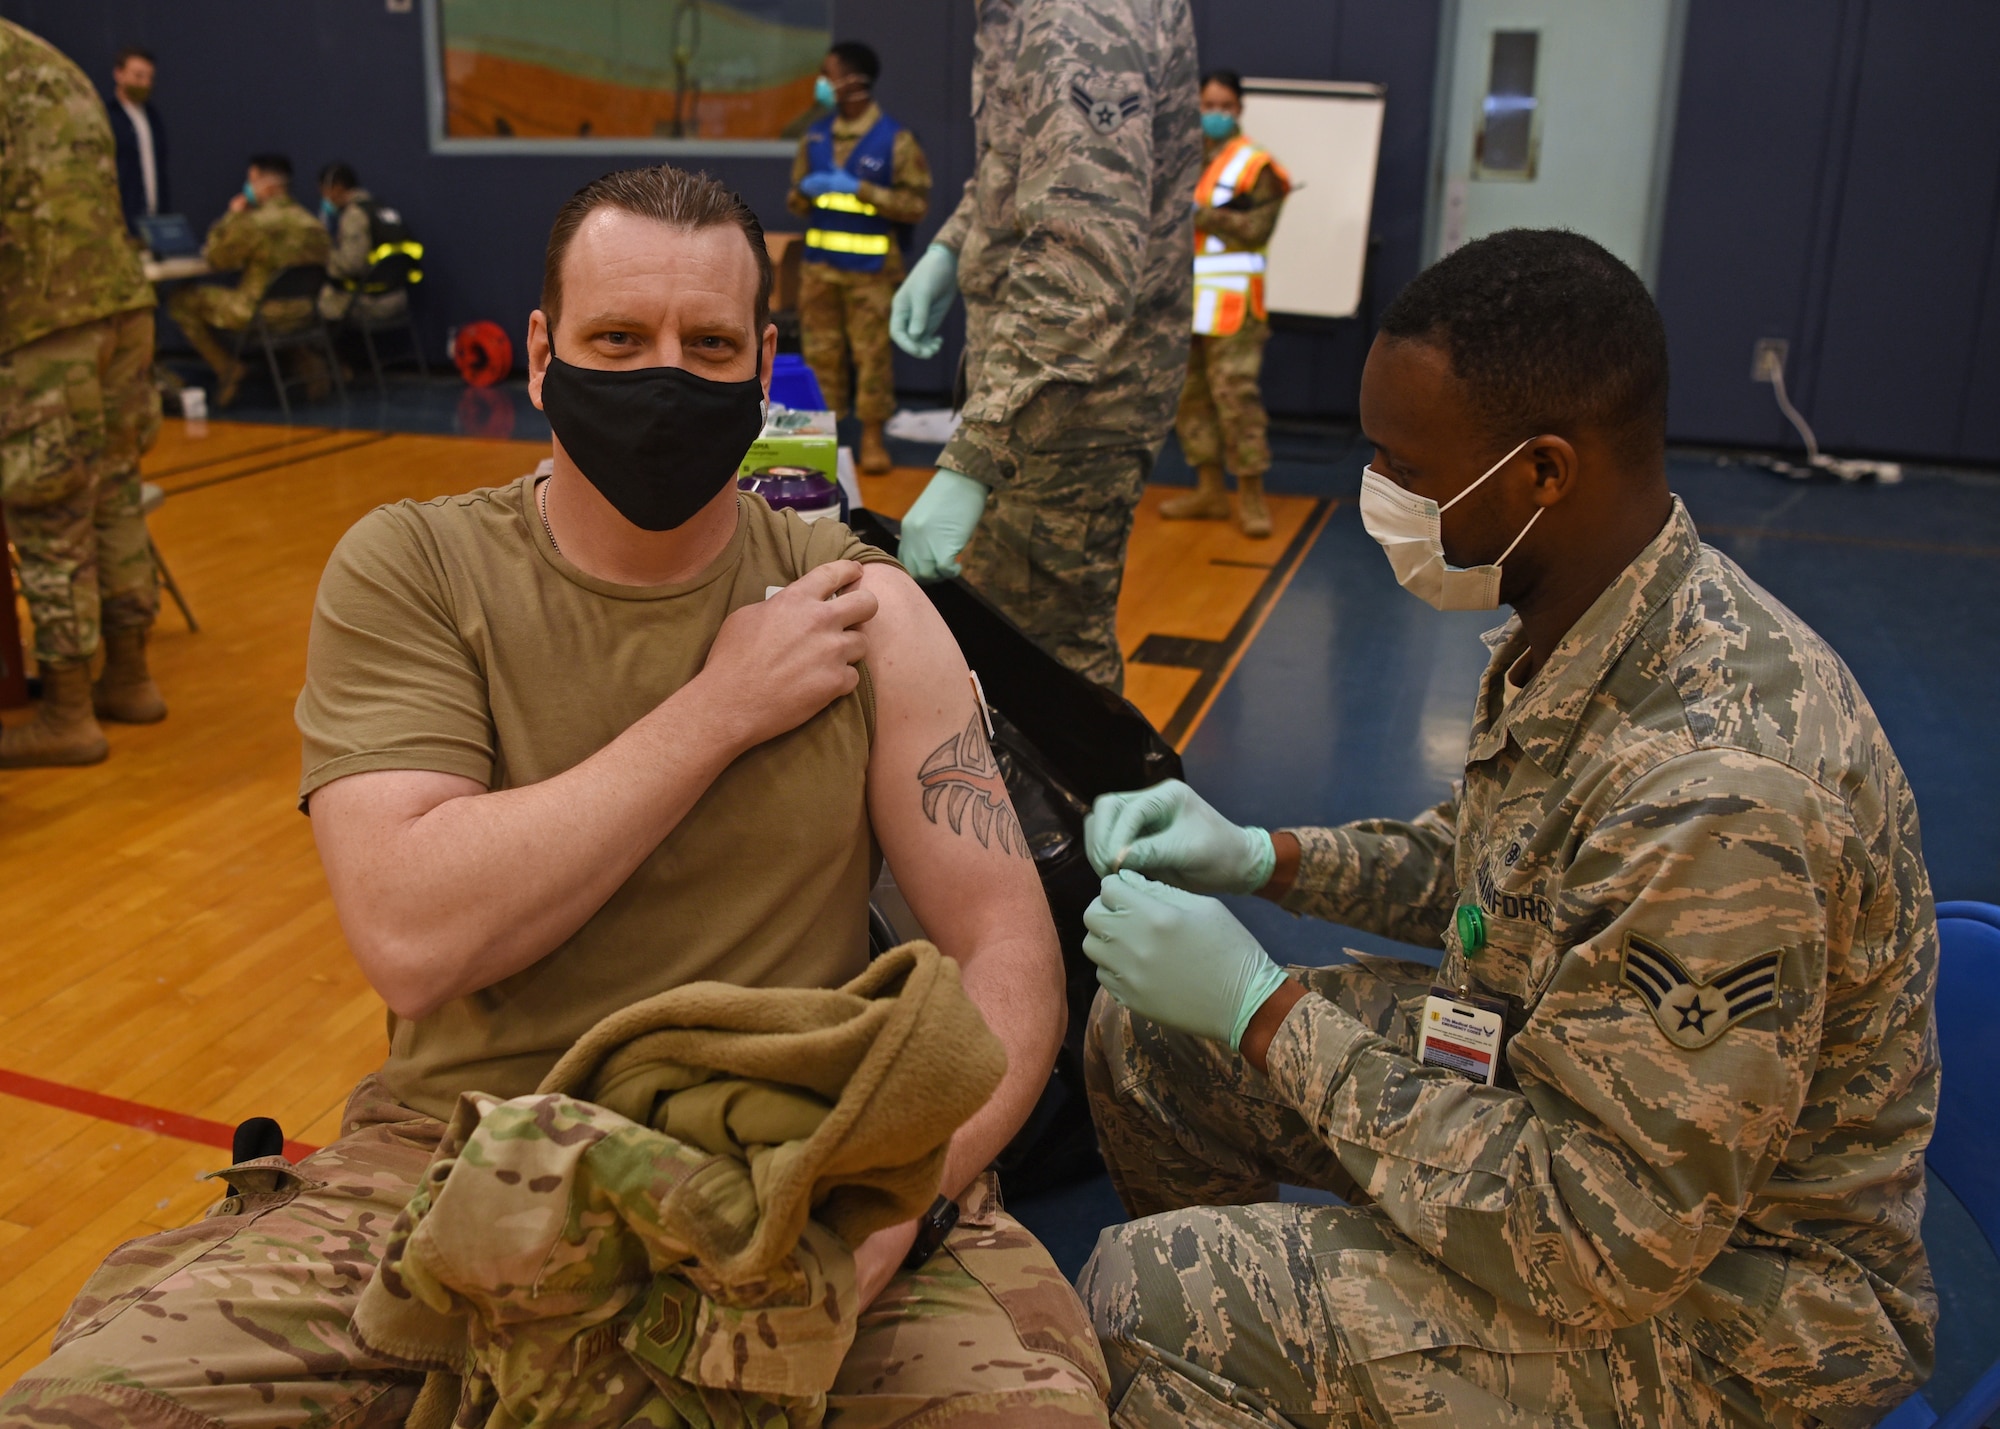 U.S. Air Force Tech Sgt. Aaron January, 17th Security Force Squadron flight sergeant, rolls up his sleeve for Senior Airman Marckus Humphries, 17th Operational Medical Readiness Squadron aerospace medical technician, to prepare his shoulder for the COVID-19 vaccine at the Mathis Fitness Center on Goodfellow Air Force Base, Texas, Jan. 20, 2021. Team Goodfellow vaccinated its frontline and mission essential positions, and those who are considered high risk first, in accordance with the Department of the Air Force’s distribution plan. (U.S. Air Force photo by Senior Airman Abbey Rieves)